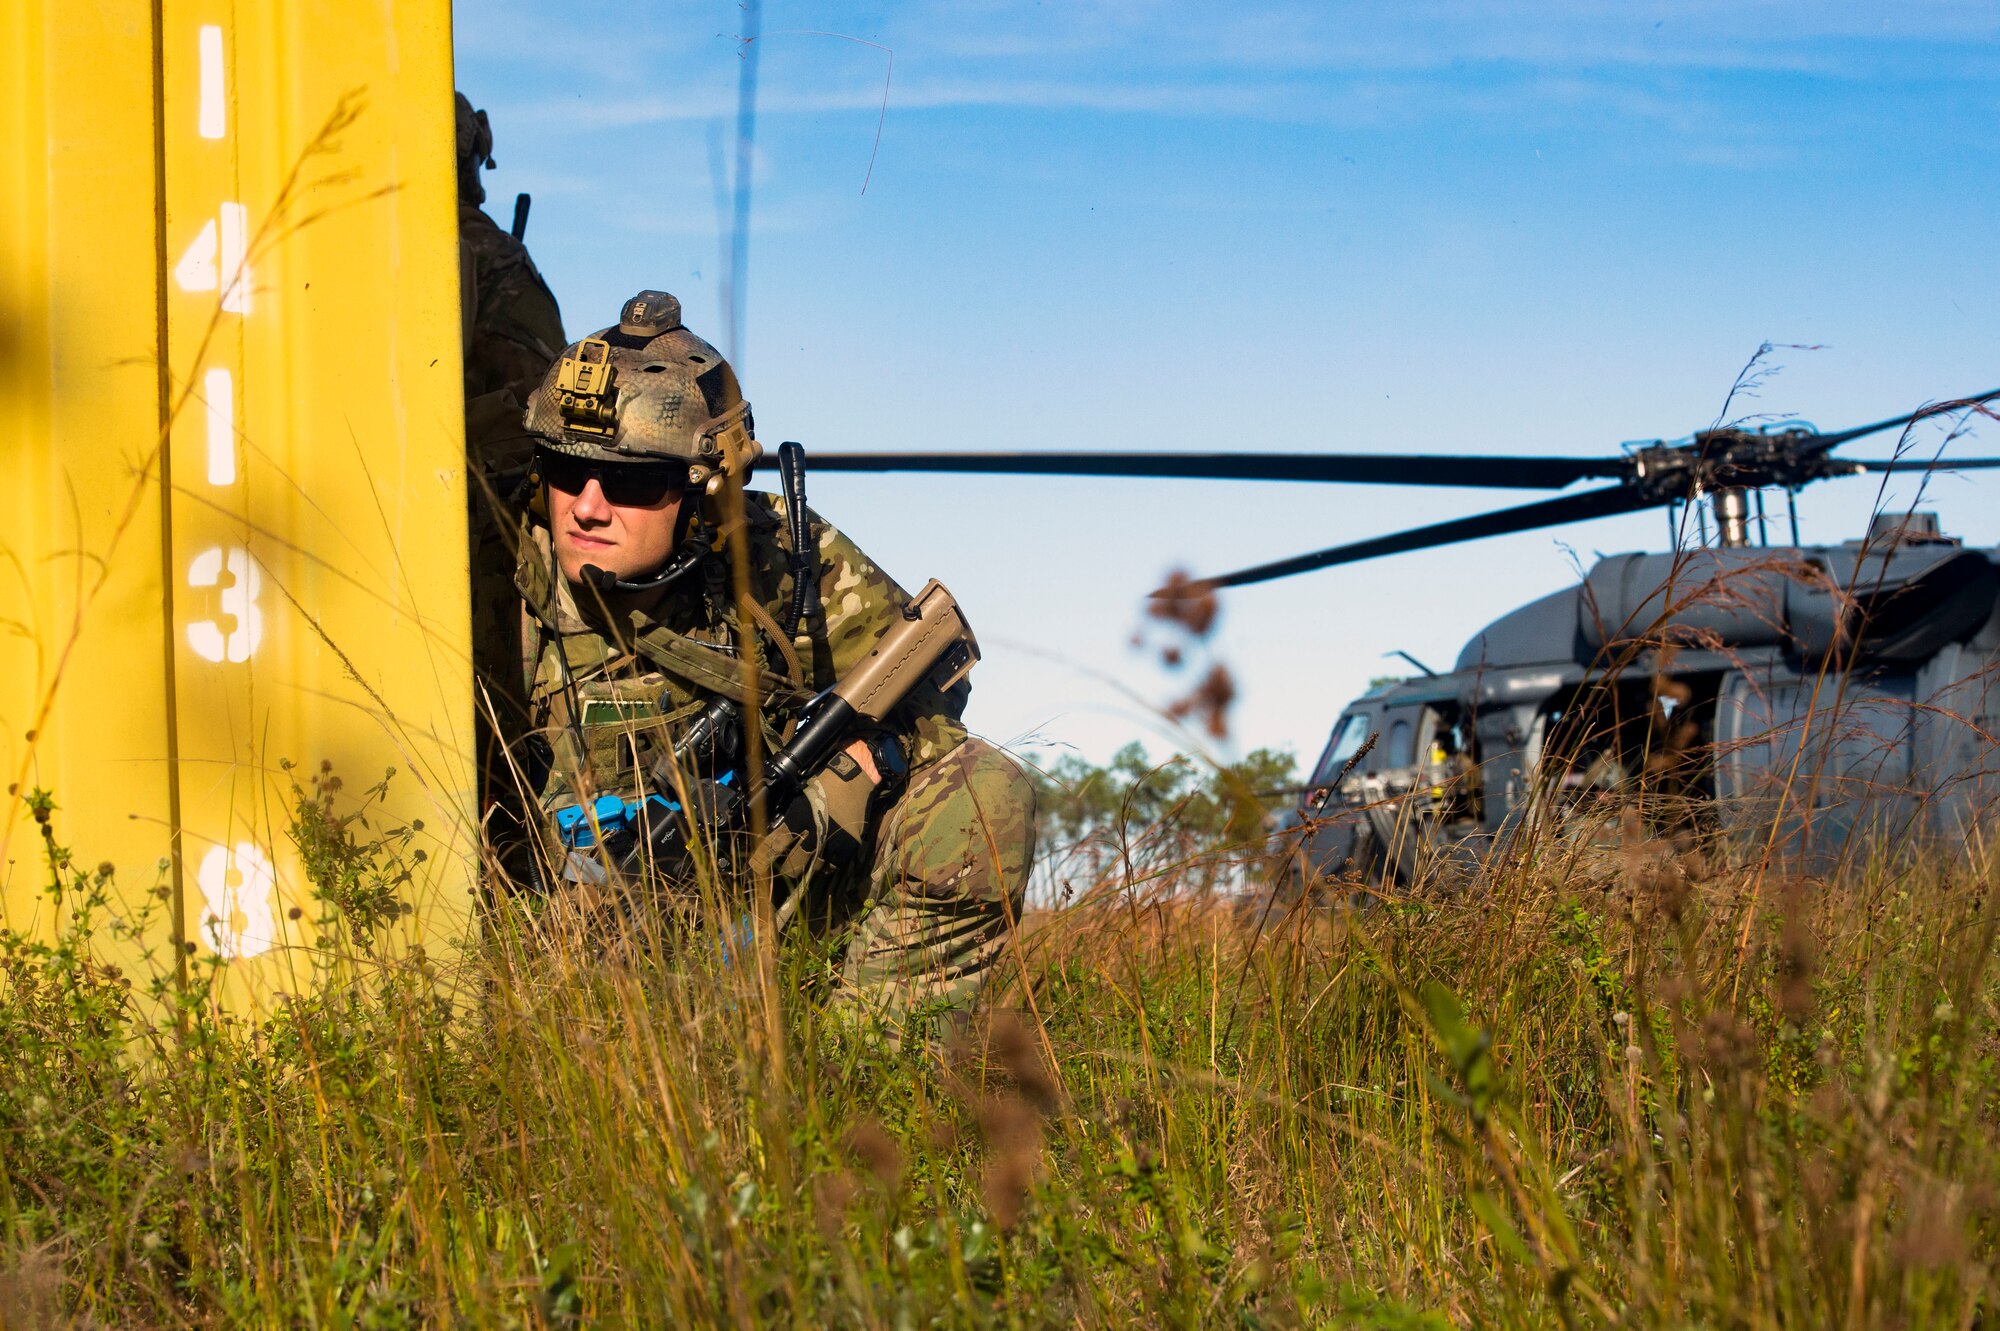 A pararescueman from the 38th Rescue Squadron (RQS) scans a mock battlefield during pre-deployment 'spin-up' training, Dec. 12, 2018, at Avon Park Air Force Range, Fla. During this pre-deployment ‘spin-up’ training, Moody’s 347th Rescue Group tested and maximized their combat search and rescue (CSAR) and personnel recovery capabilities. Under normal circumstances, the HH-60G Pave Hawk helicopter crews and maintainers deploy from Moody and integrate with Guardian Angel teams from different bases. This time, Moody’s 38th RQS and 41st RQS’s will deploy together and utilized this exercise to improve their mission readiness and cohesion before their departure. (U.S. Air Force photo by Senior Airman Greg Nash)